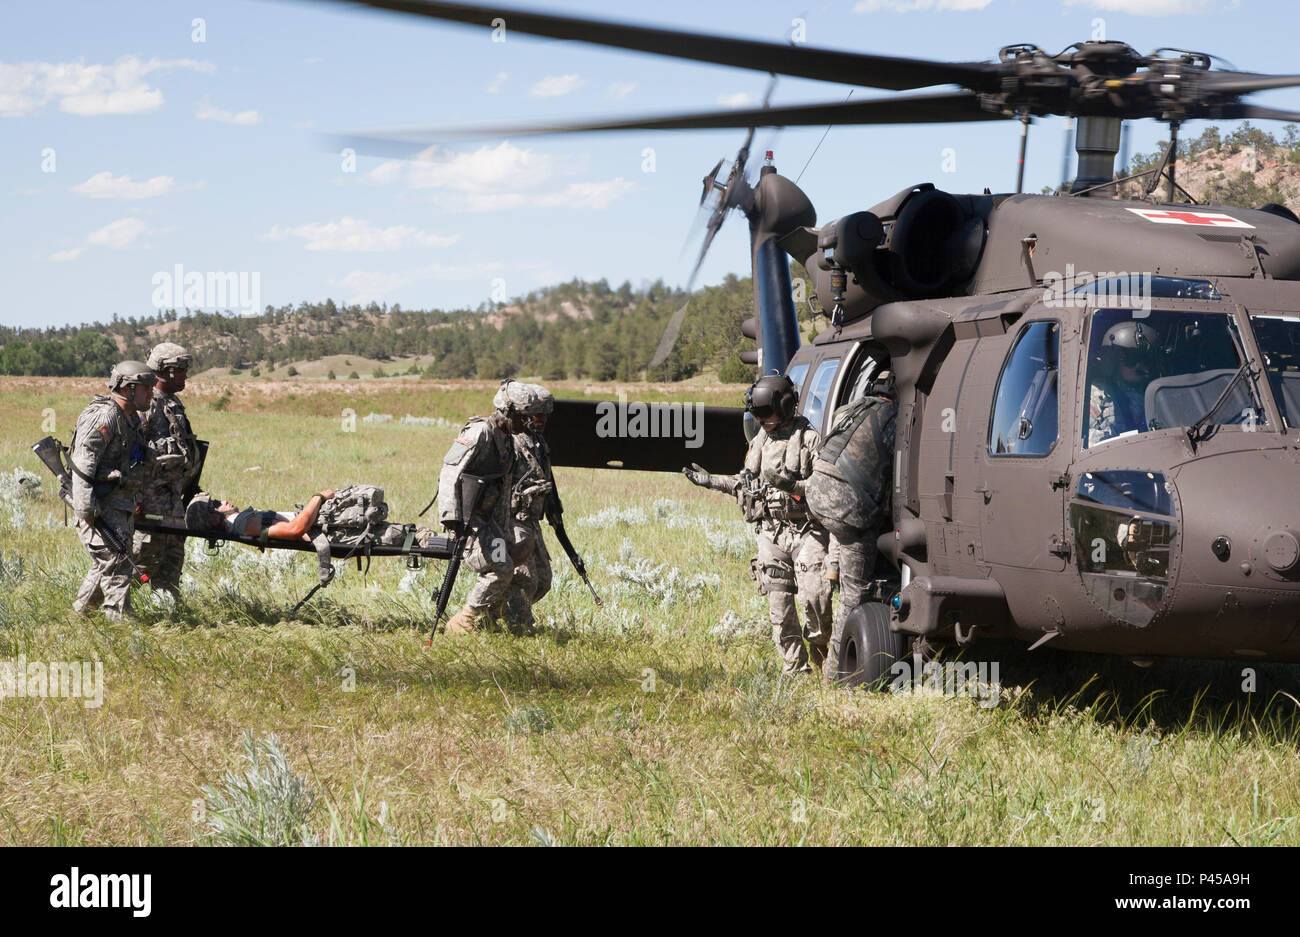 U.S. Army Soldiers of the 396th Medical Company (Ground Ambulance) and 235th Military Police Company, Army Reserve, load a simulated casualty onto a UH-60 Blackhawk during a convoy operations exercise Golden Coyote exercise in Camp Guernsey, Wyo., June 15, 2016. The Golden Coyote exercise is a three-phase, scenario-driven exercise conducted in the Black Hills of South Dakota and Wyoming, which enables commanders to focus on mission essential task requirements, warrior tasks and battle drills. (U.S. Army photo by Spc. Chenyang Liu/Released) Stock Photo